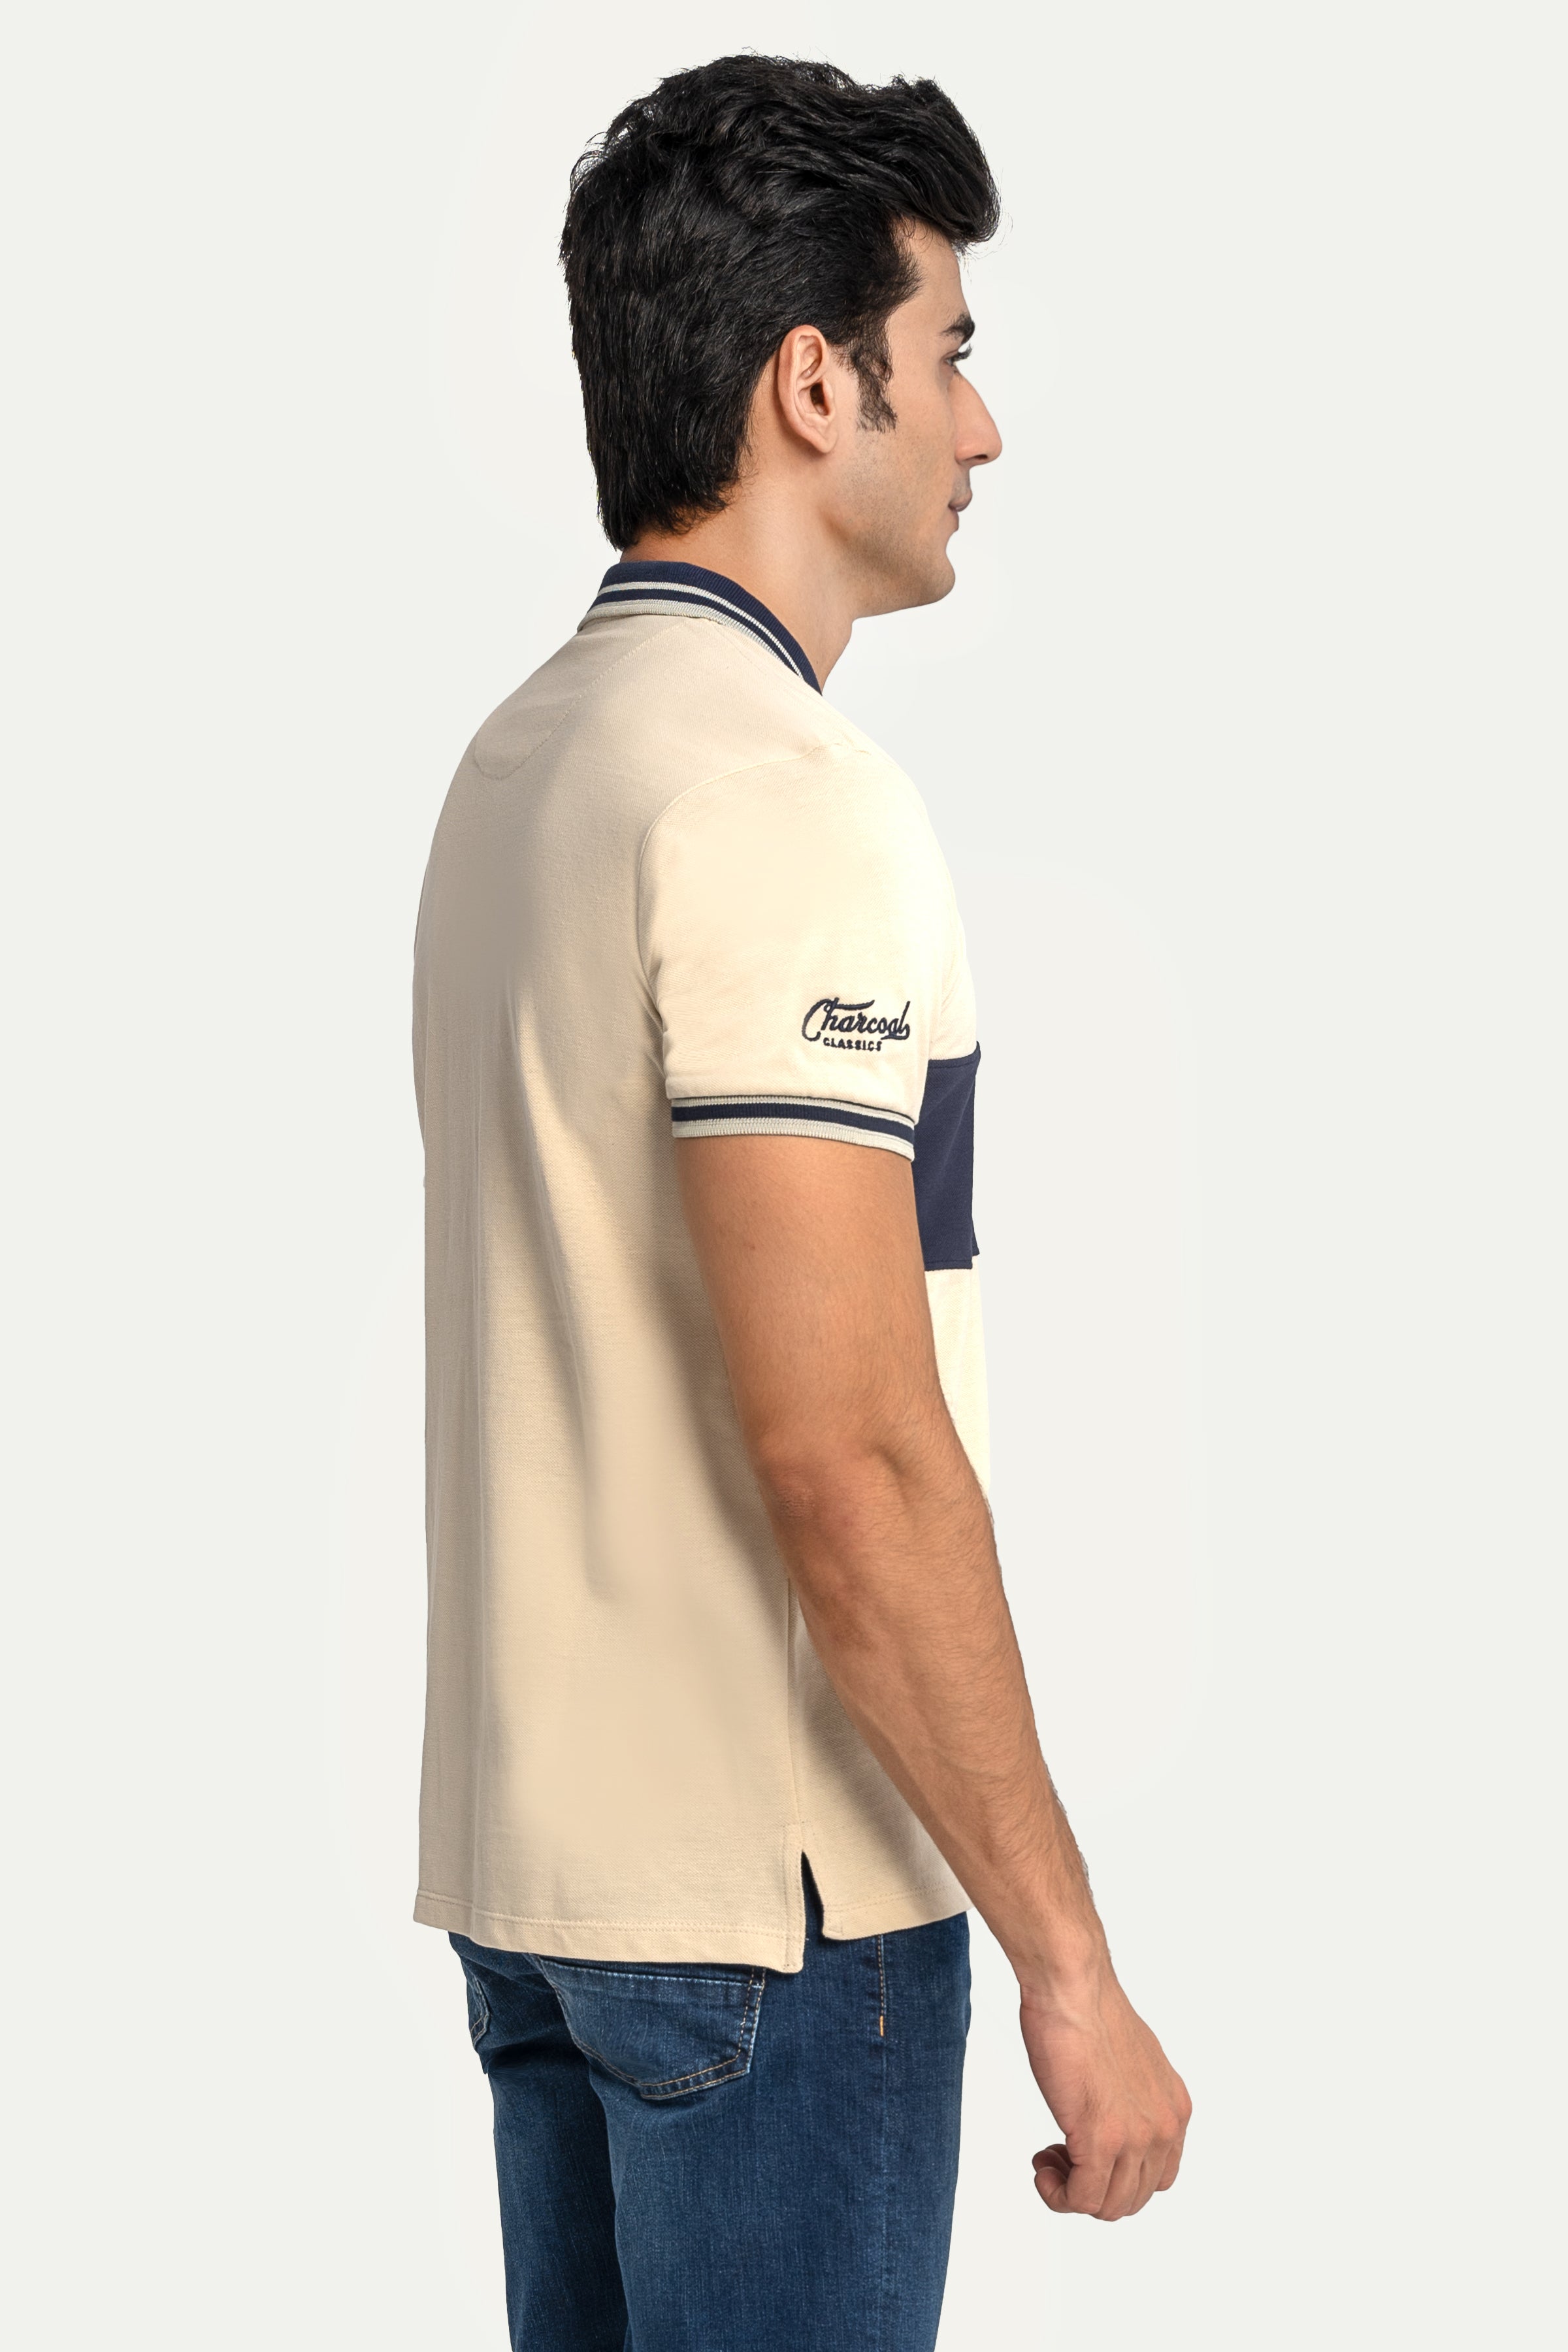 CLASSIC POLO BEIGE NAVY - Charcoal Clothing